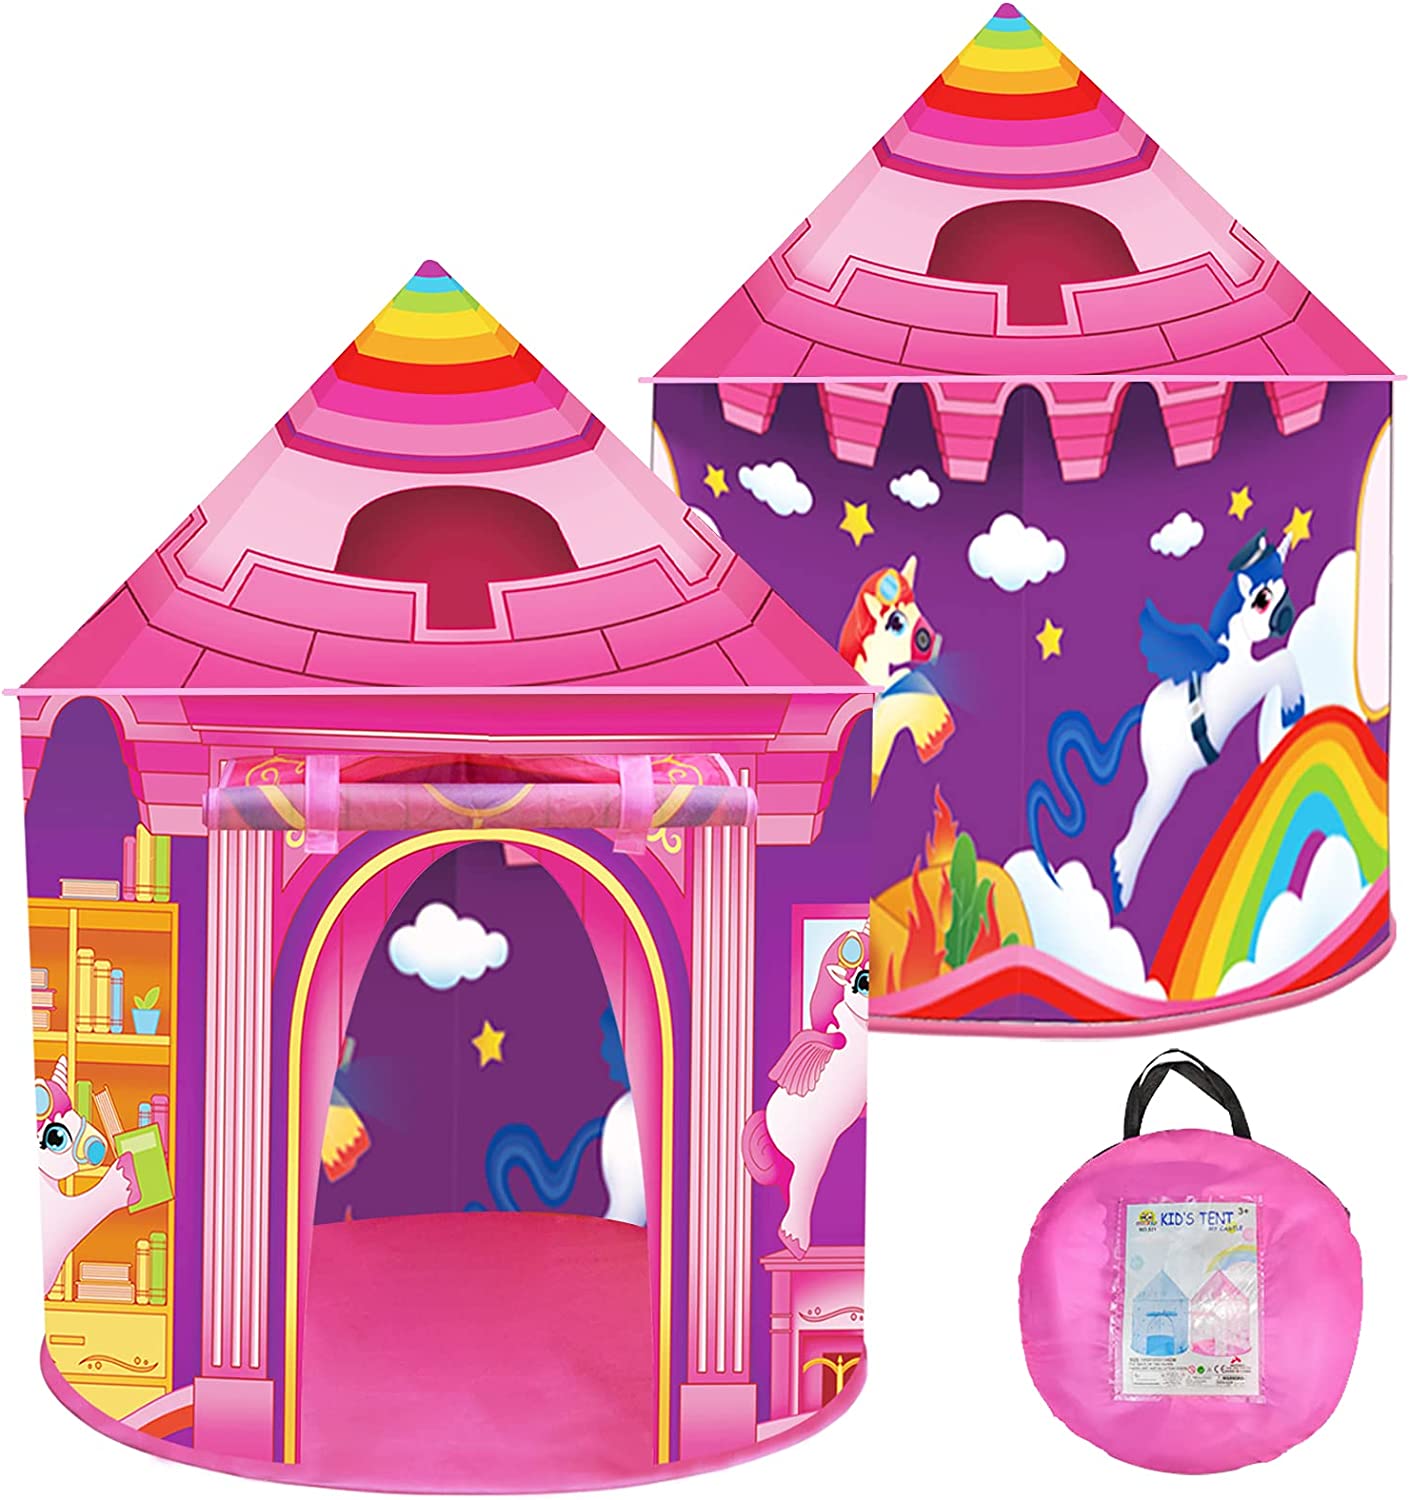 Princess Tent Girls Unicorn Large Playhouse Kids Castle Play Tent with Star Lights Gift Toy for Children Indoor and Outdoor Games